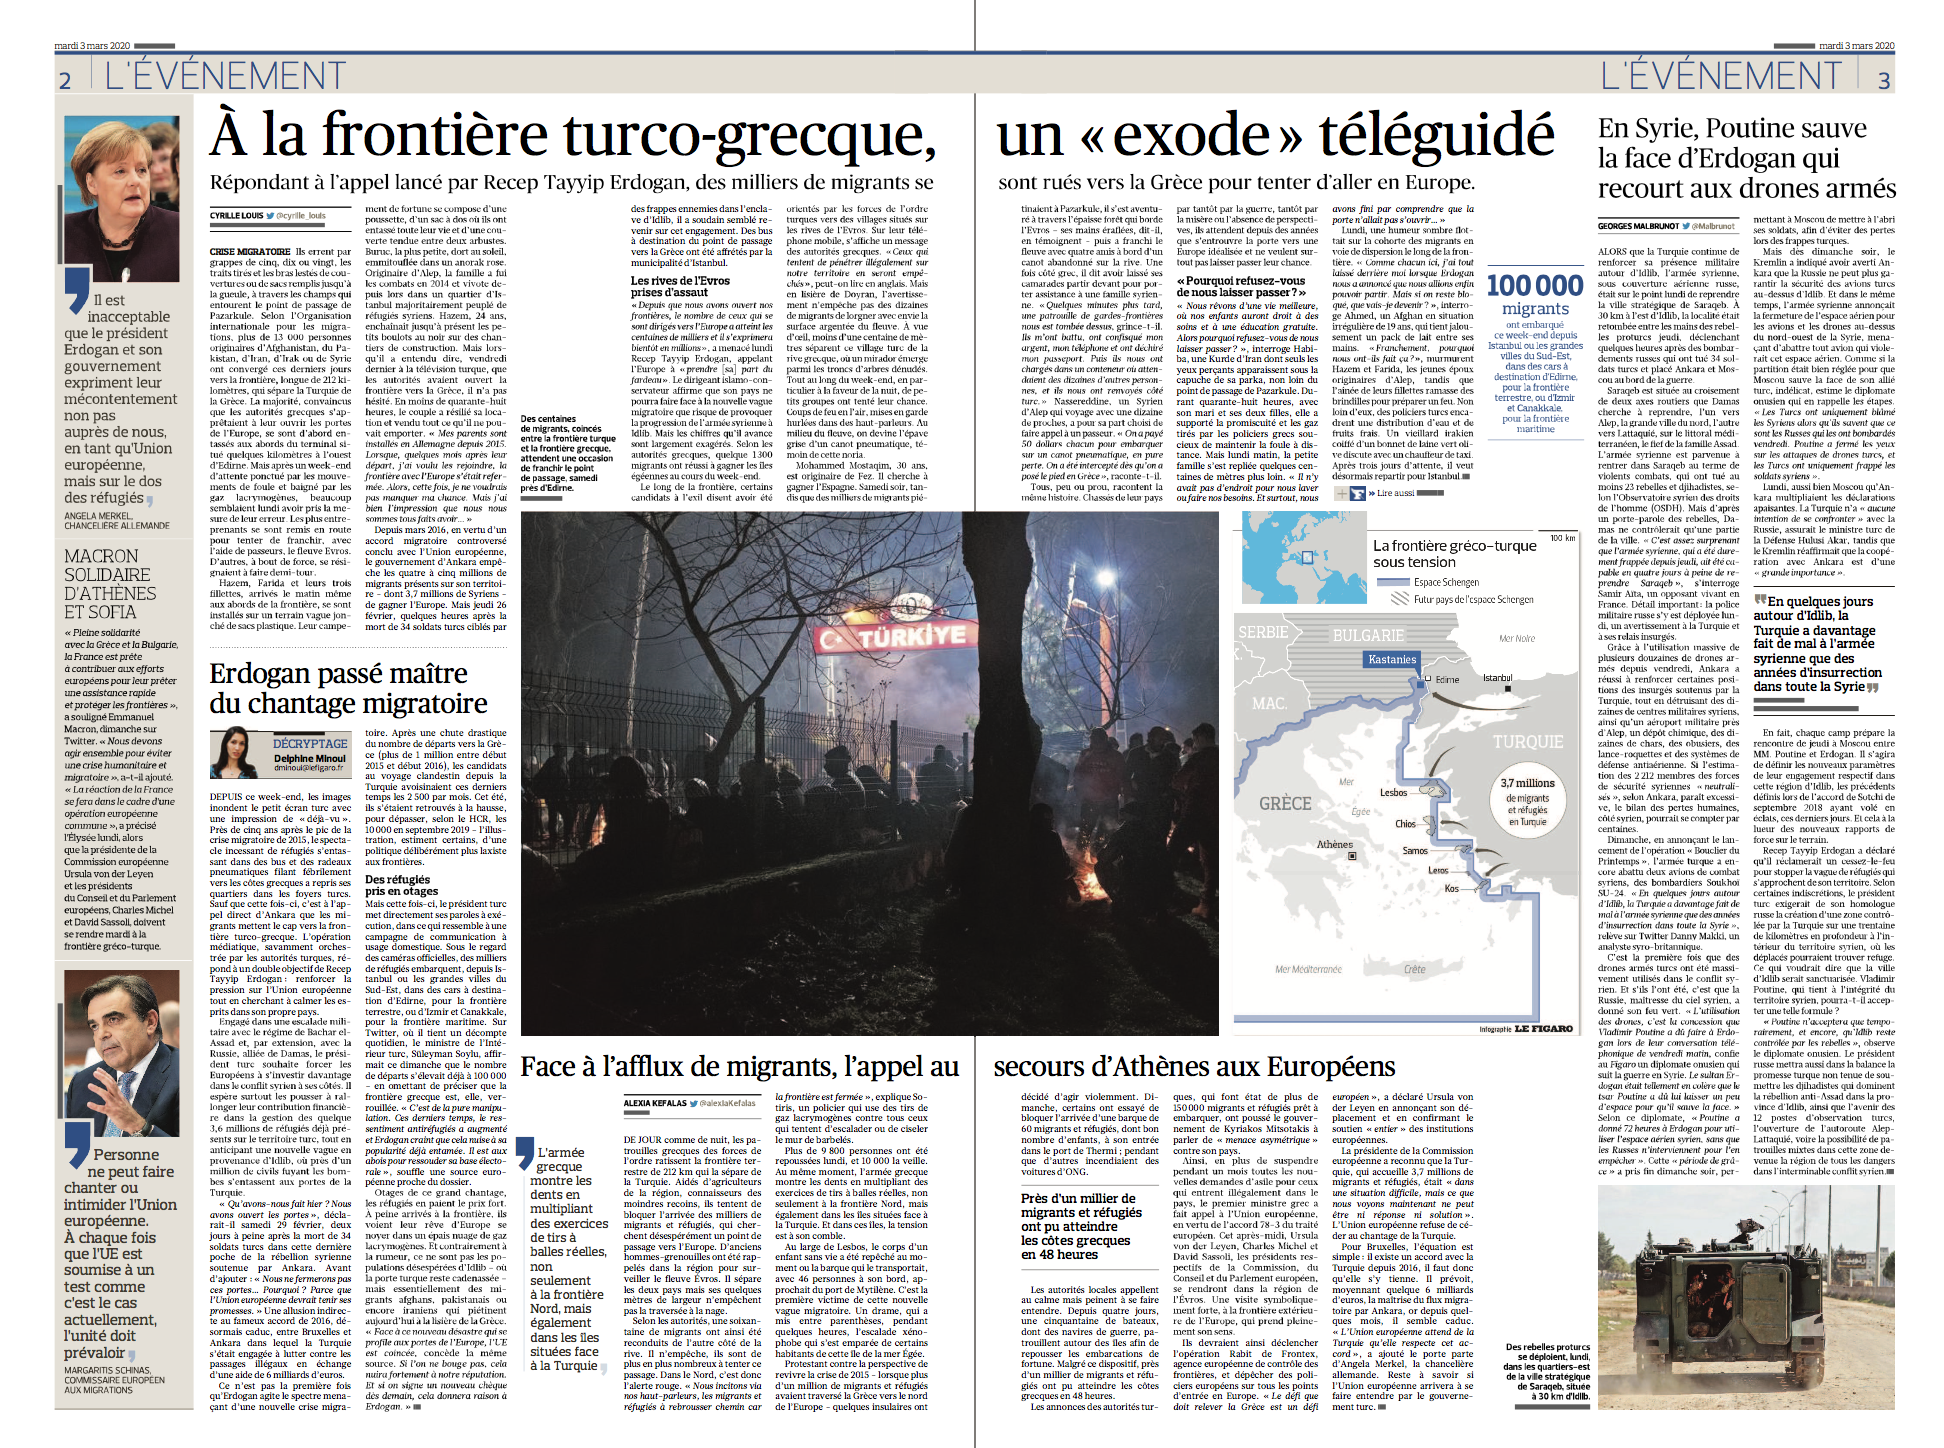 Image from Publications - Assignment for Le Figaro